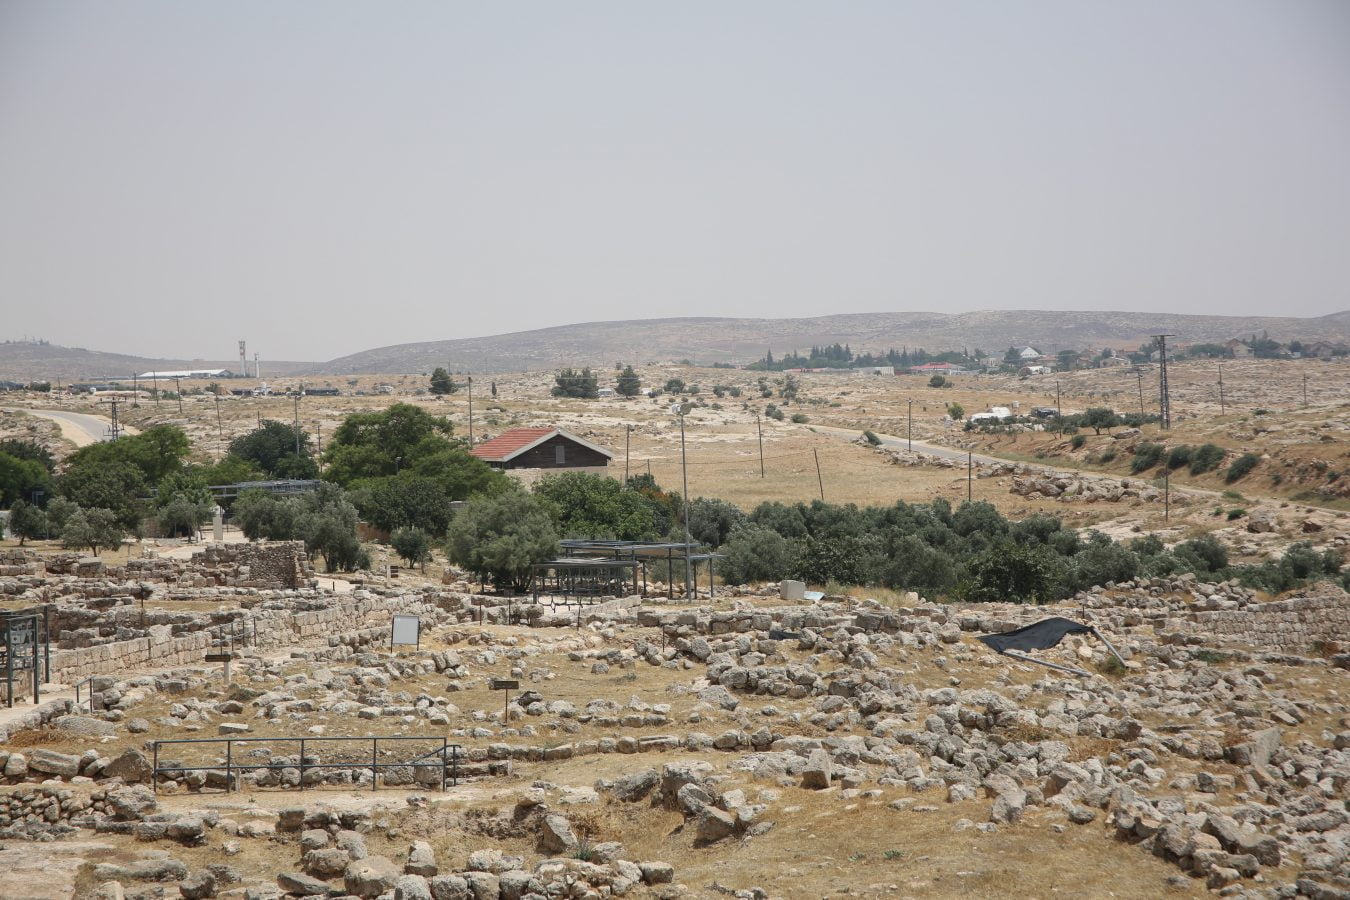 The Israeli government forcibly evicted hundreds of Palestinians to develop the ancient ruins of Susya/Susiya in the south of the West bank into a tourist attraction and settlement.